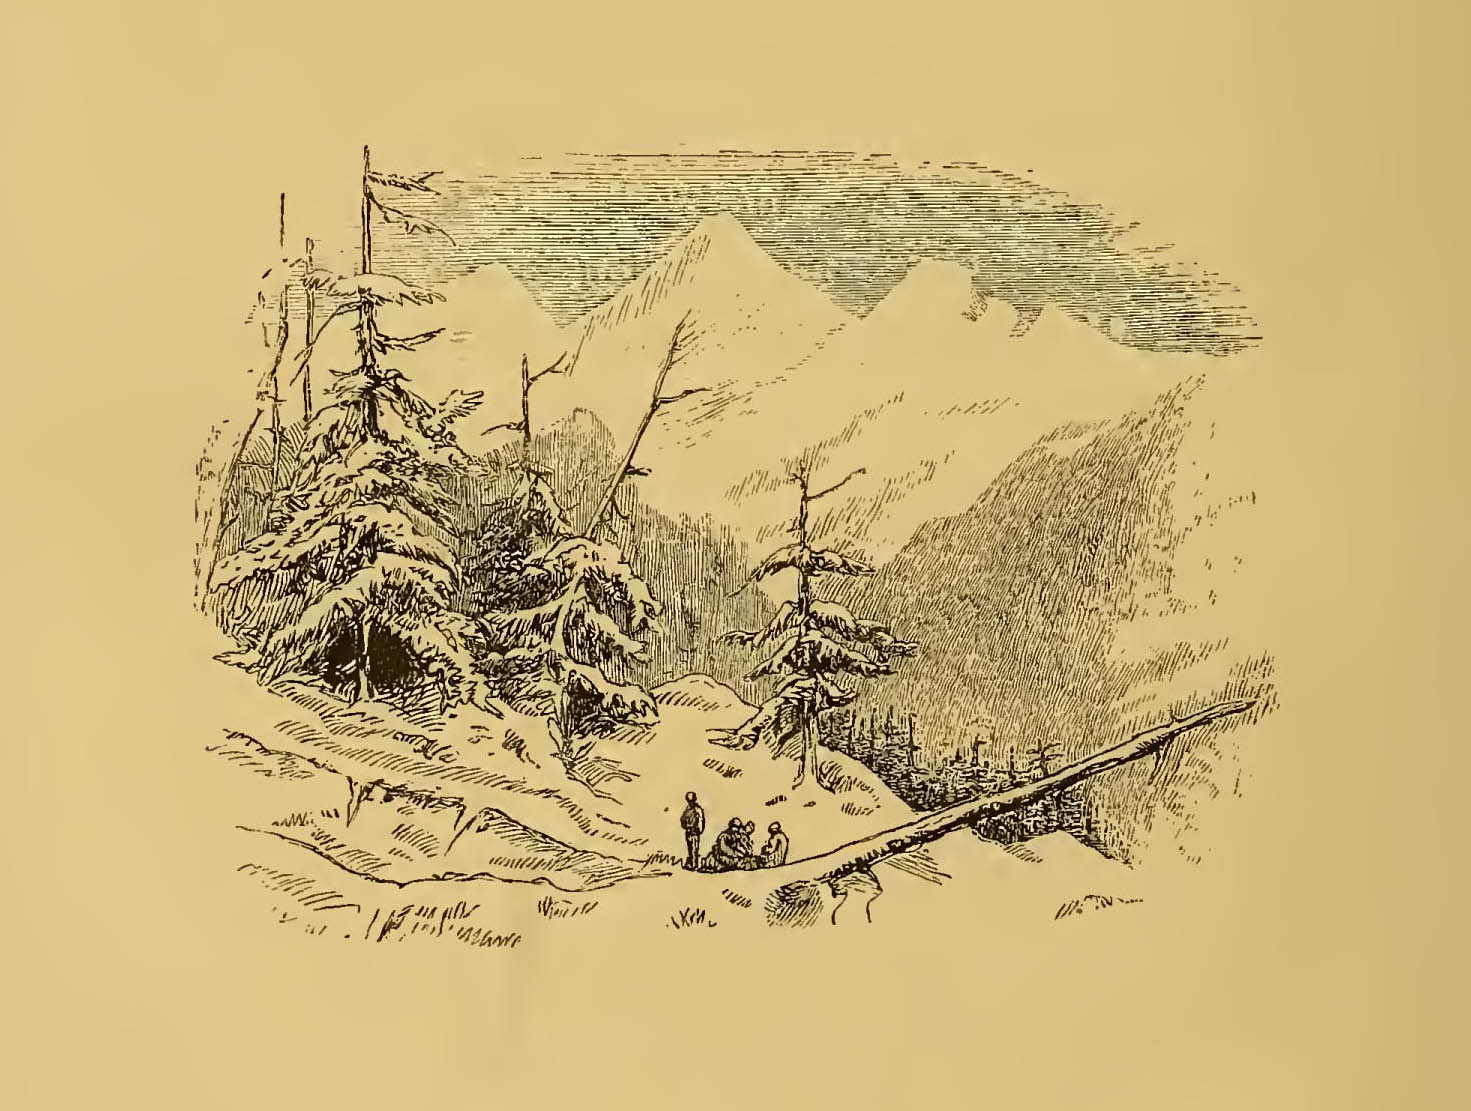 group sitting in mountainous landscape with pine trees